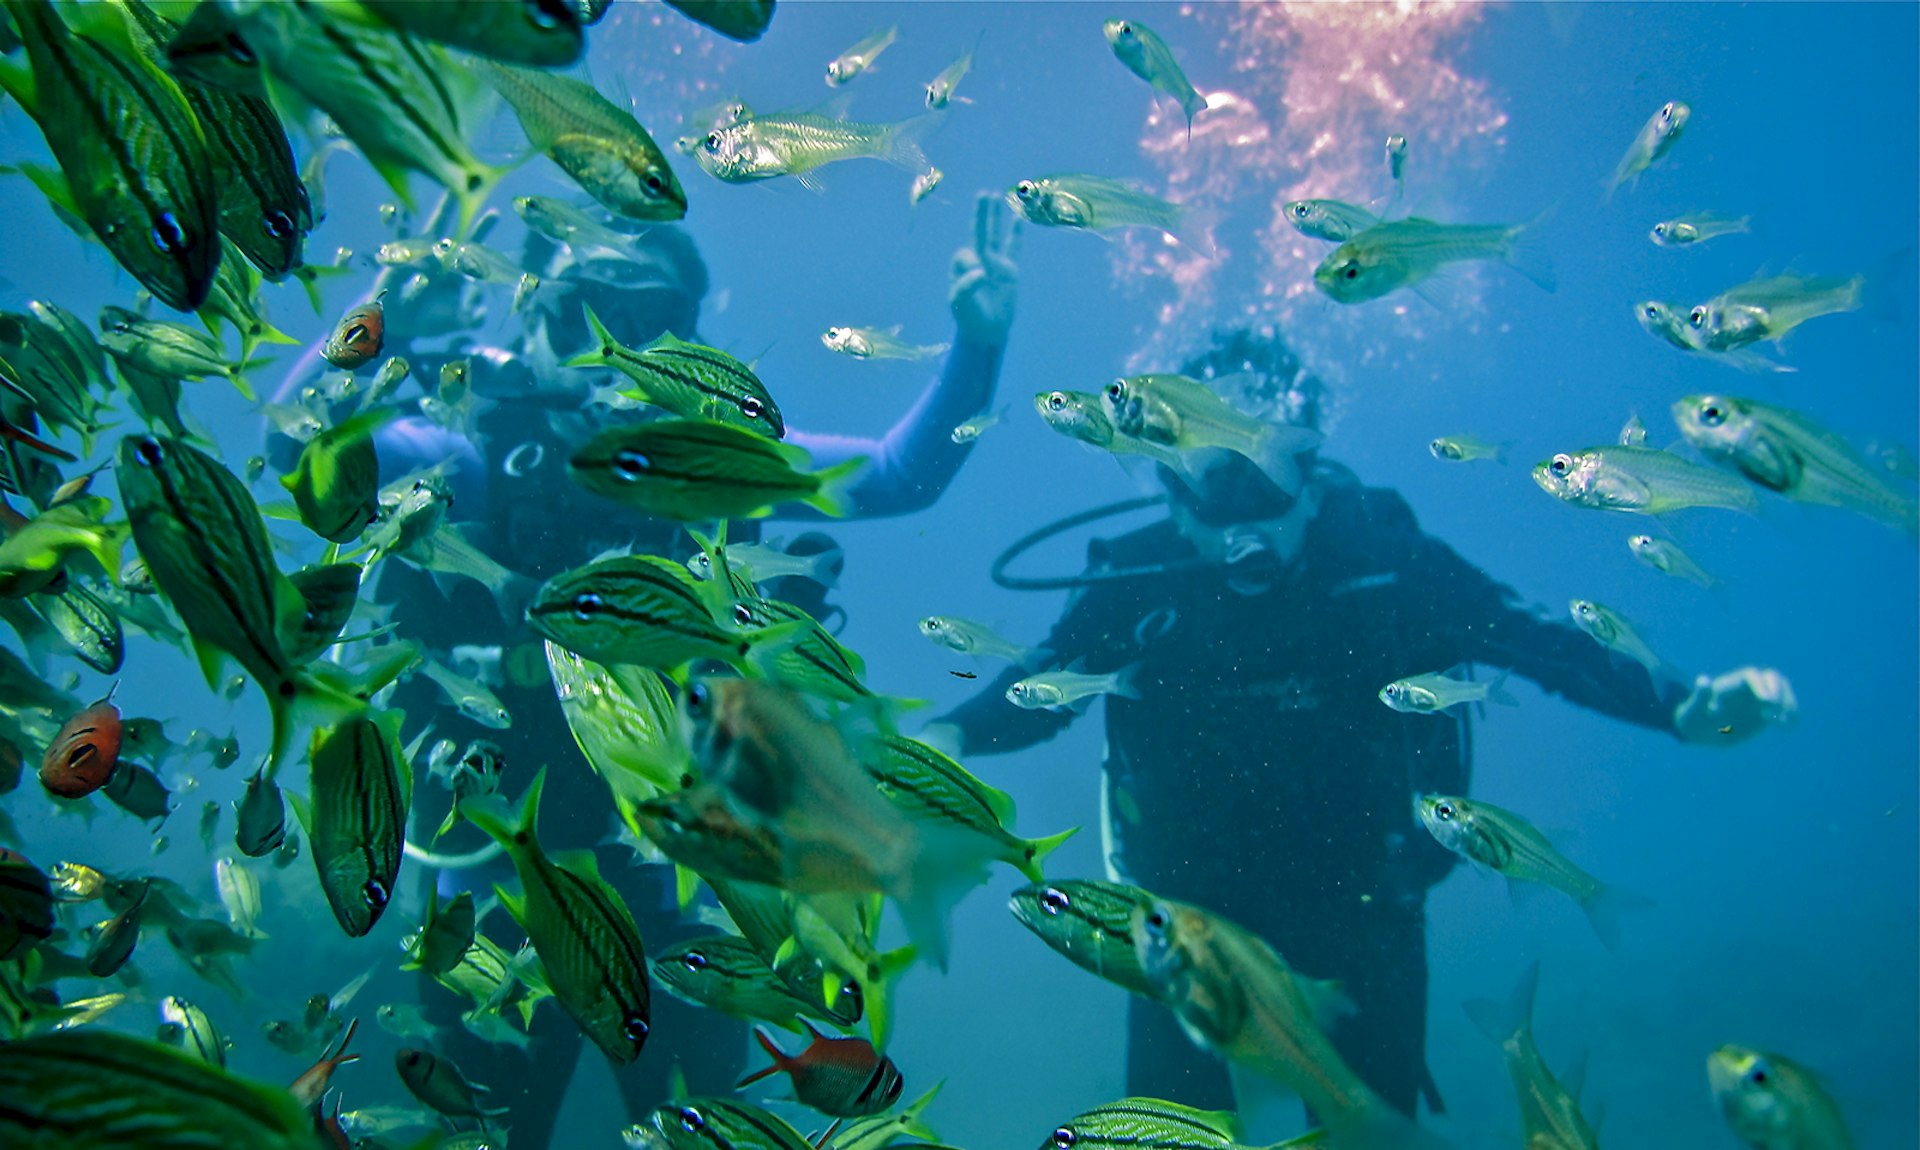 A school of small fish swim close to the camera lens with scuba divers in the background